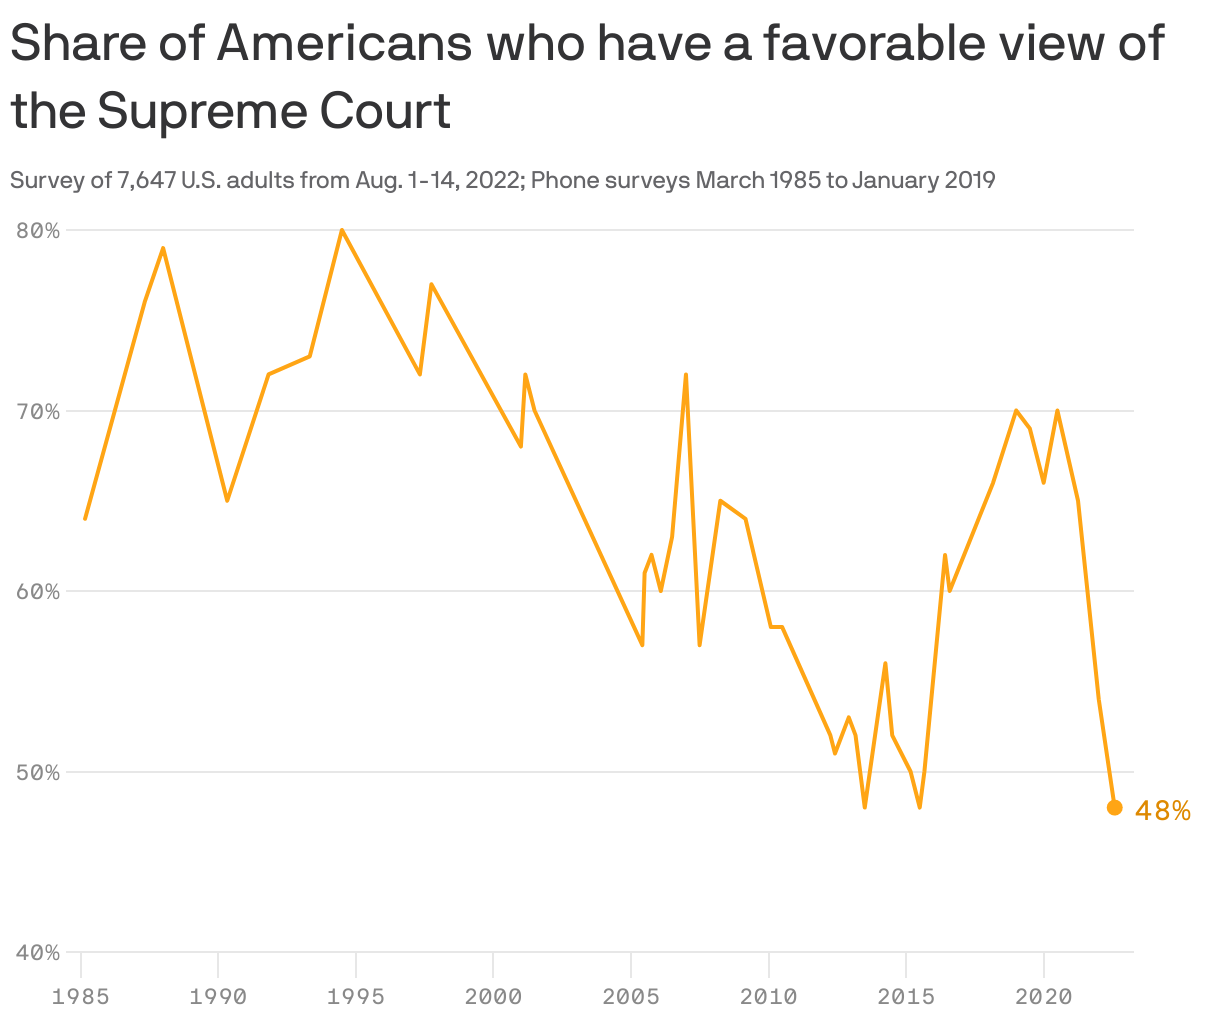 Share of Americans who have a favorable view of the Supreme Court